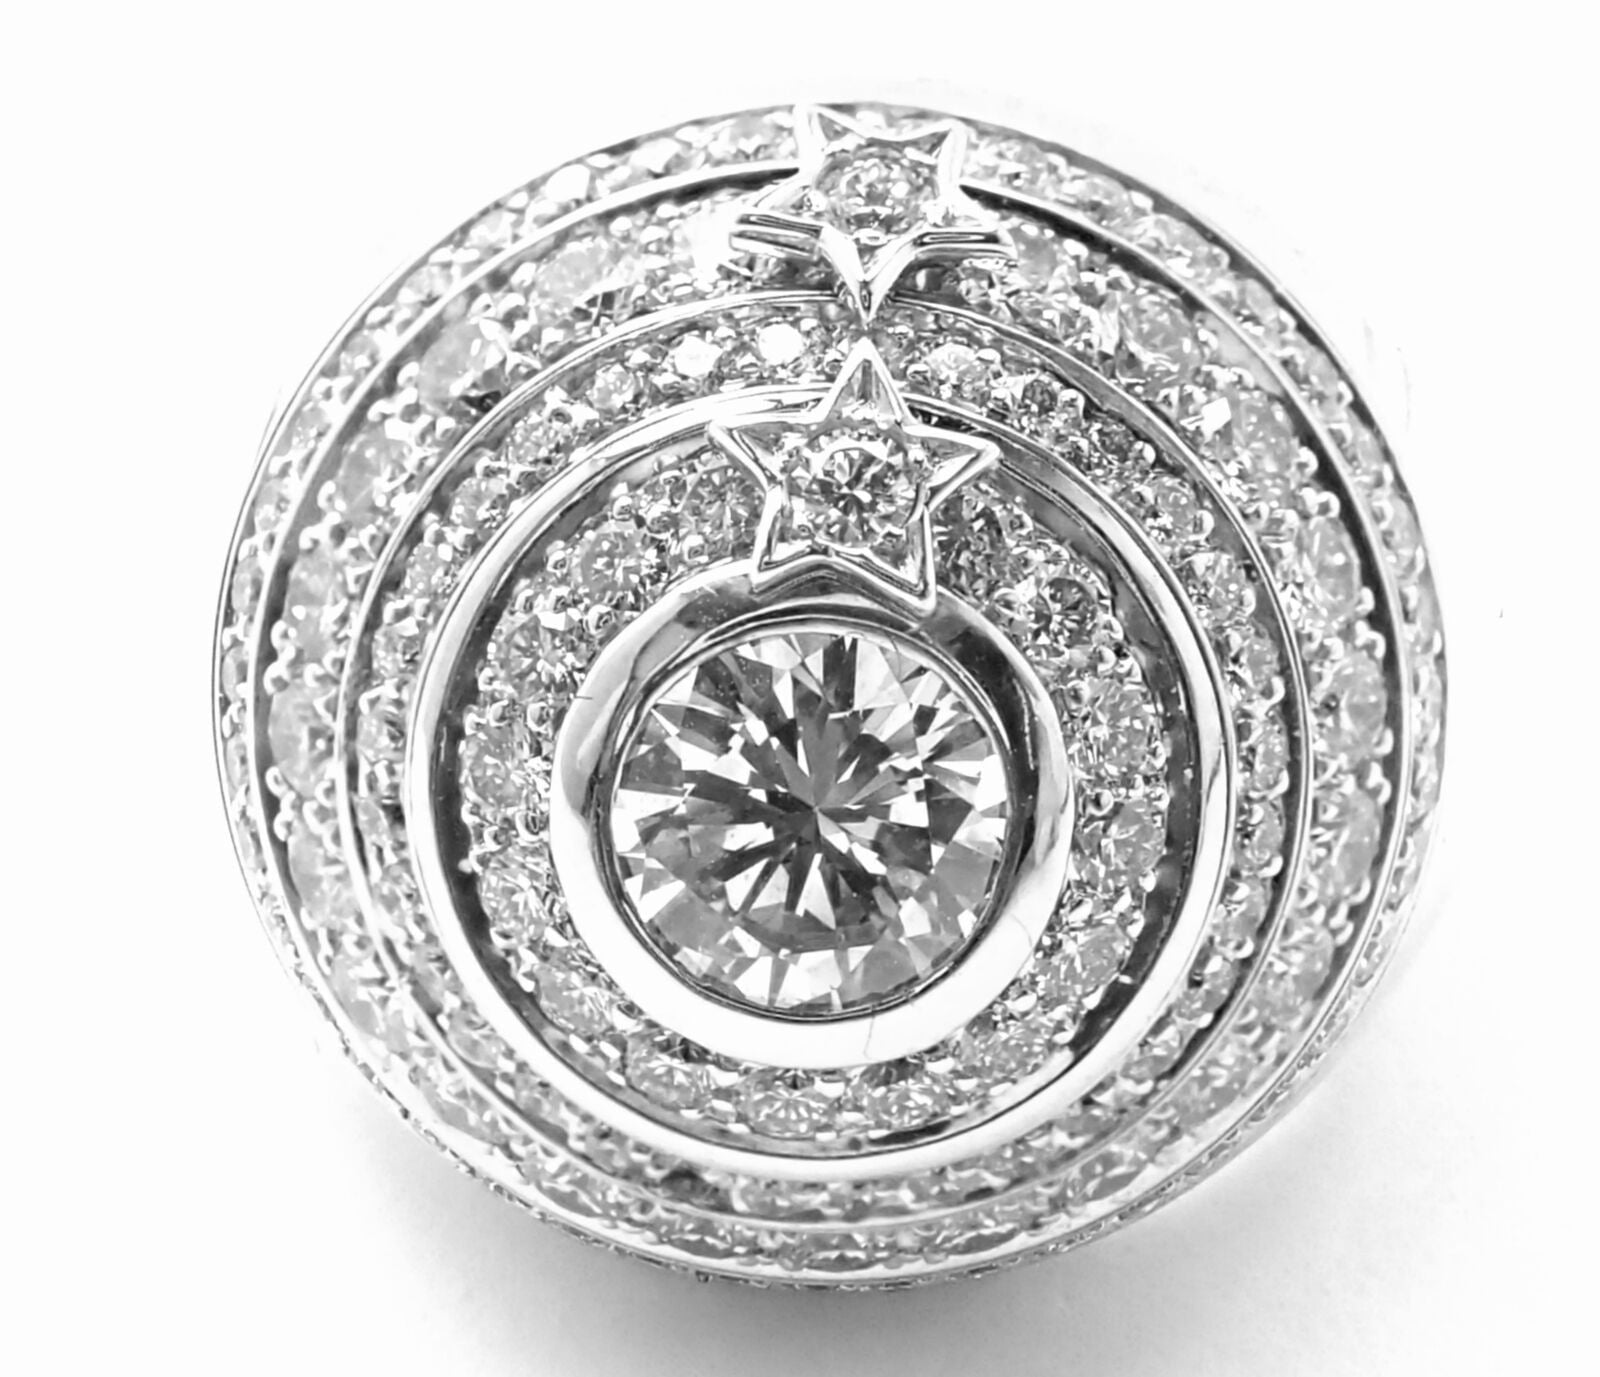 CHANEL Jewelry & Watches:Fine Jewelry:Rings Authentic! Chanel Comete Star 18k White Gold Diamond Large Spinning Dome Ring